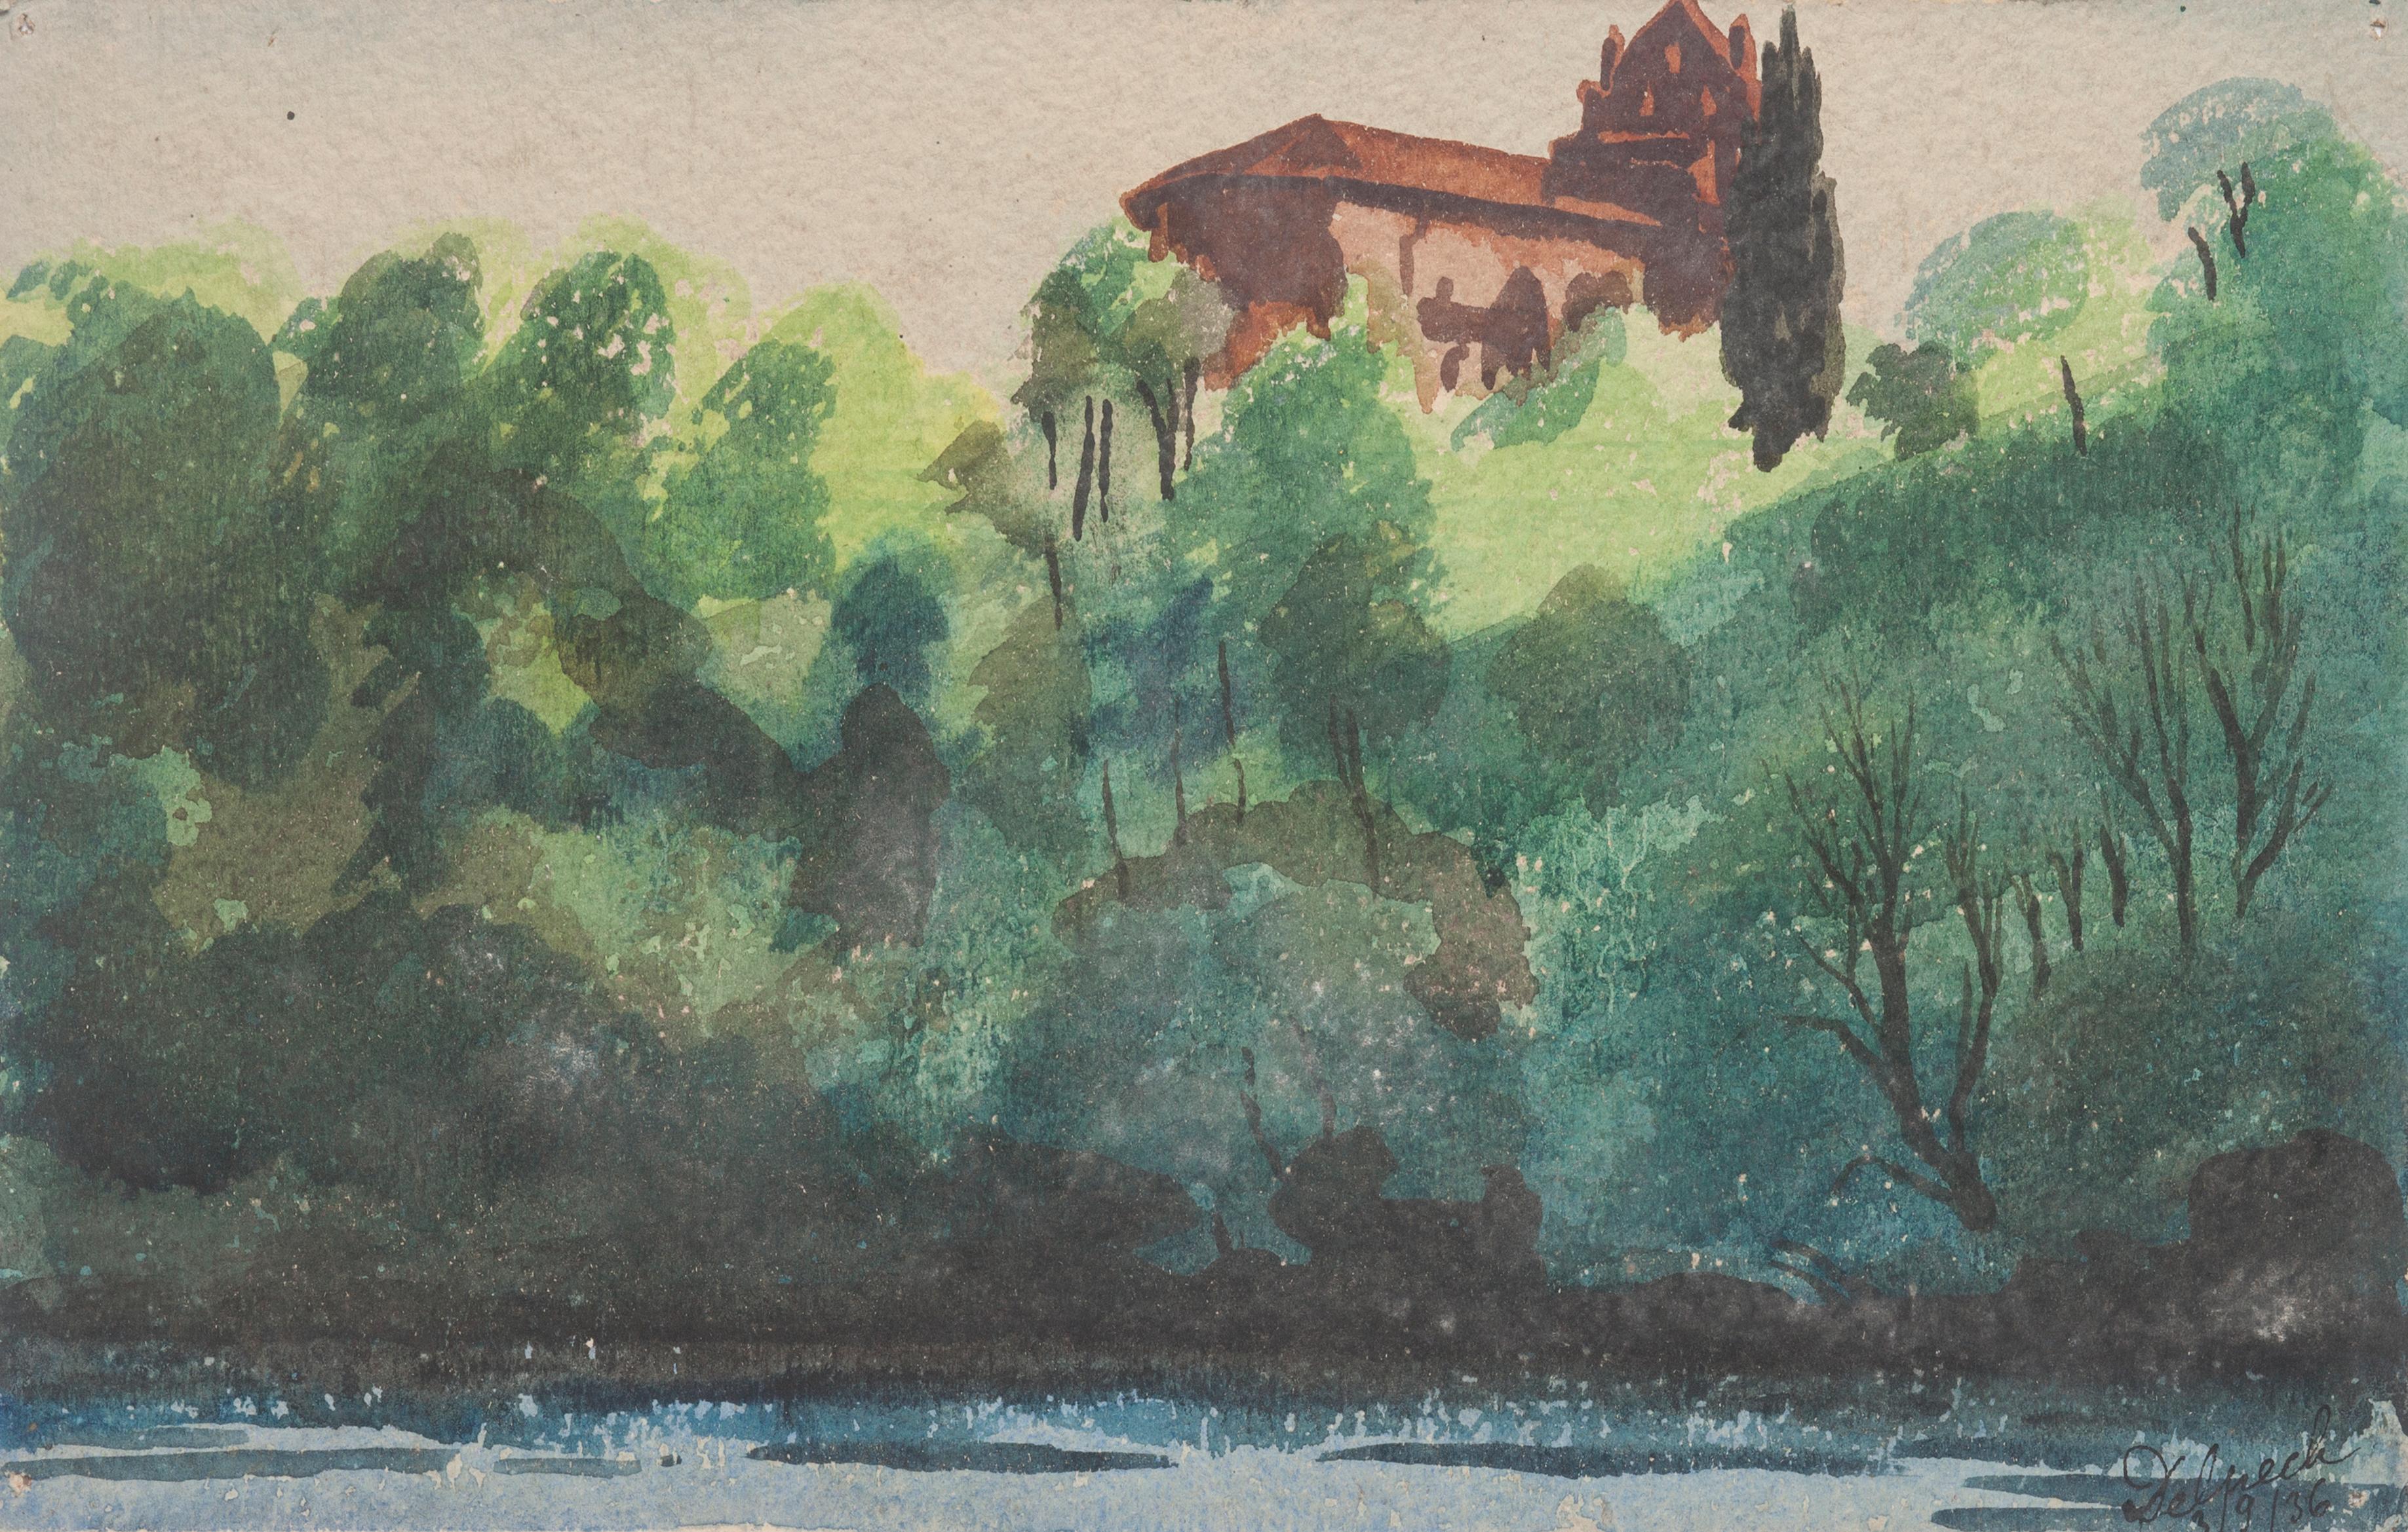 "Landscape" is an original drawing in watercolor on paper, realized by Jean Delpech (1916-1988). 
The state of preservation of the artwork is very good.

Sheet dimension: 15 x 23.5 cm.

The artwork represents beautiful landscape with vivid color,